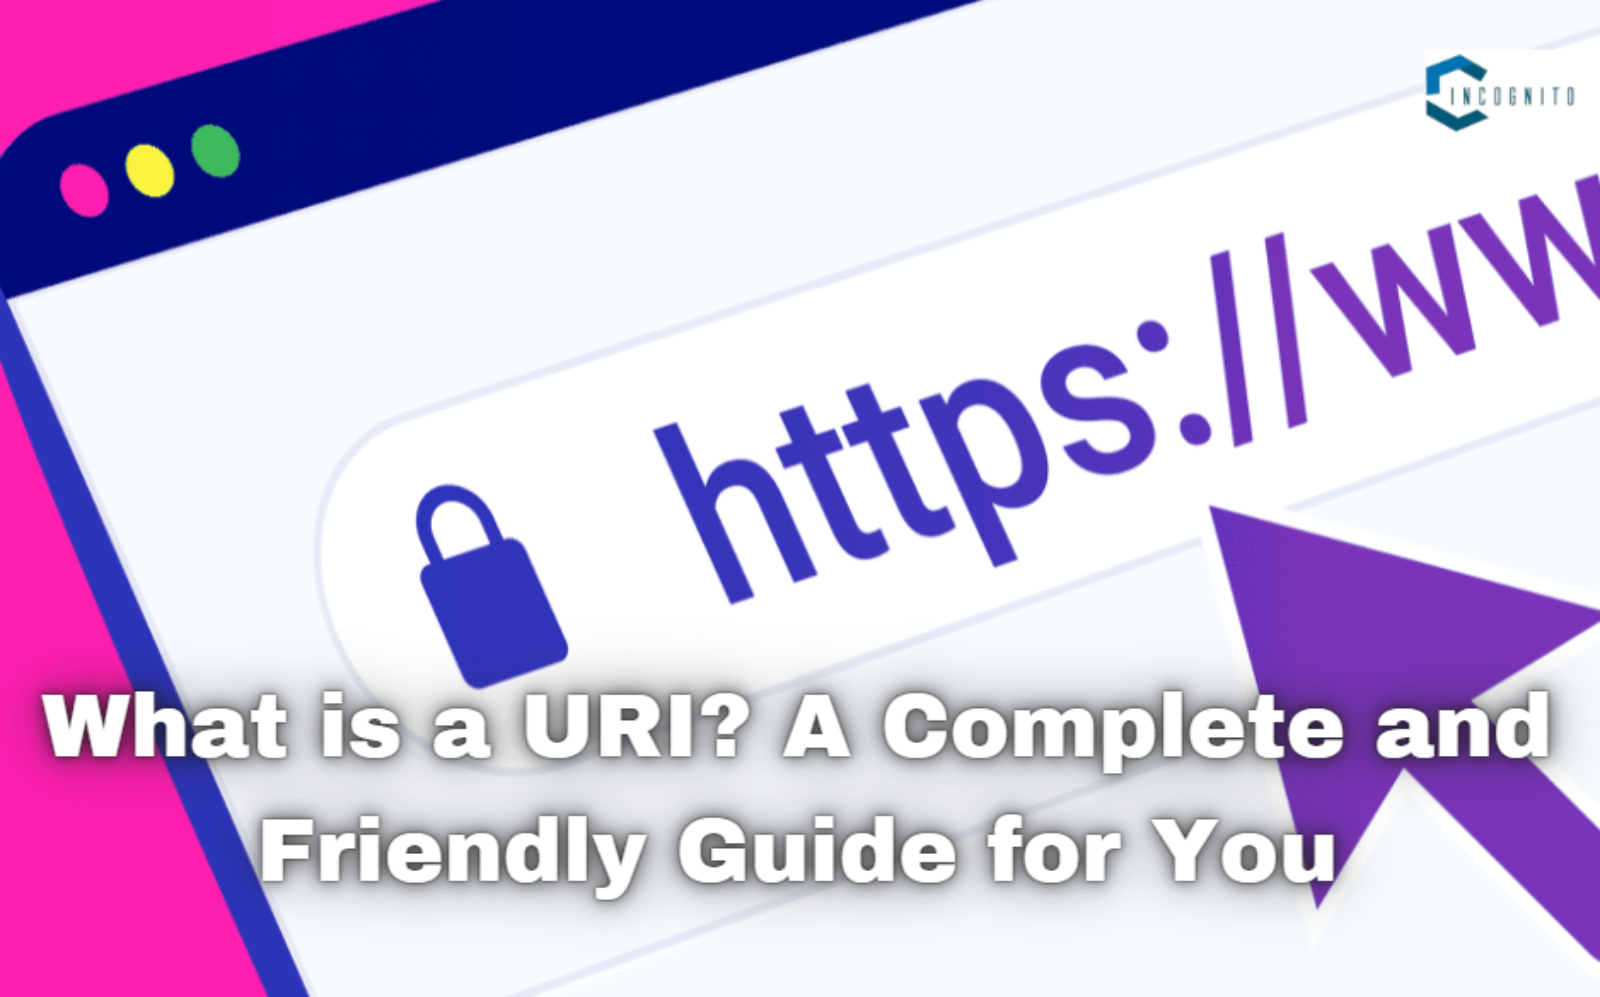 What is a URI? A Complete and Friendly Guide for You